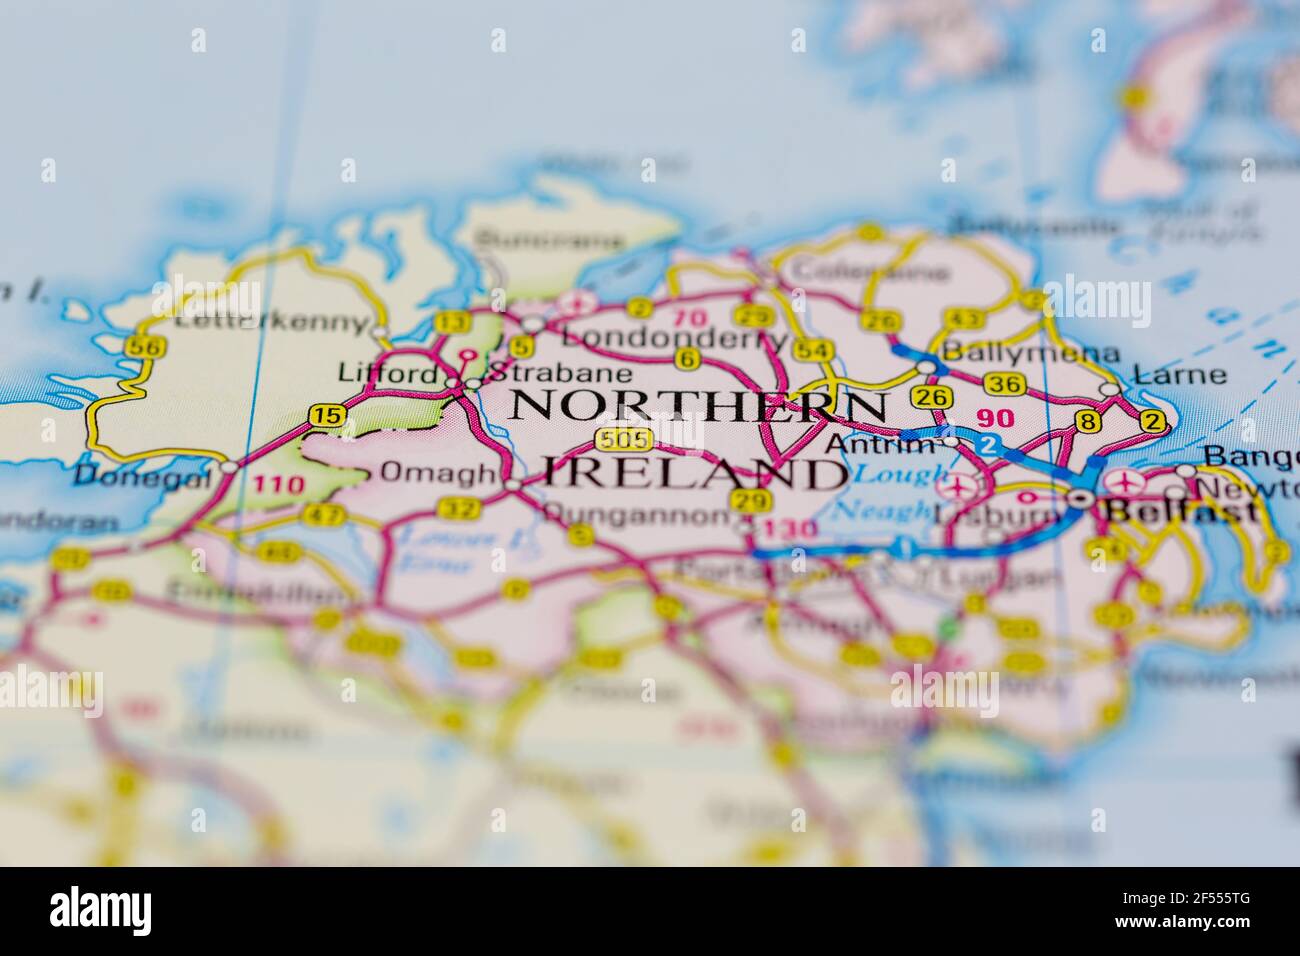 Northern ireland Shown on a Geography map or road map Stock Photo